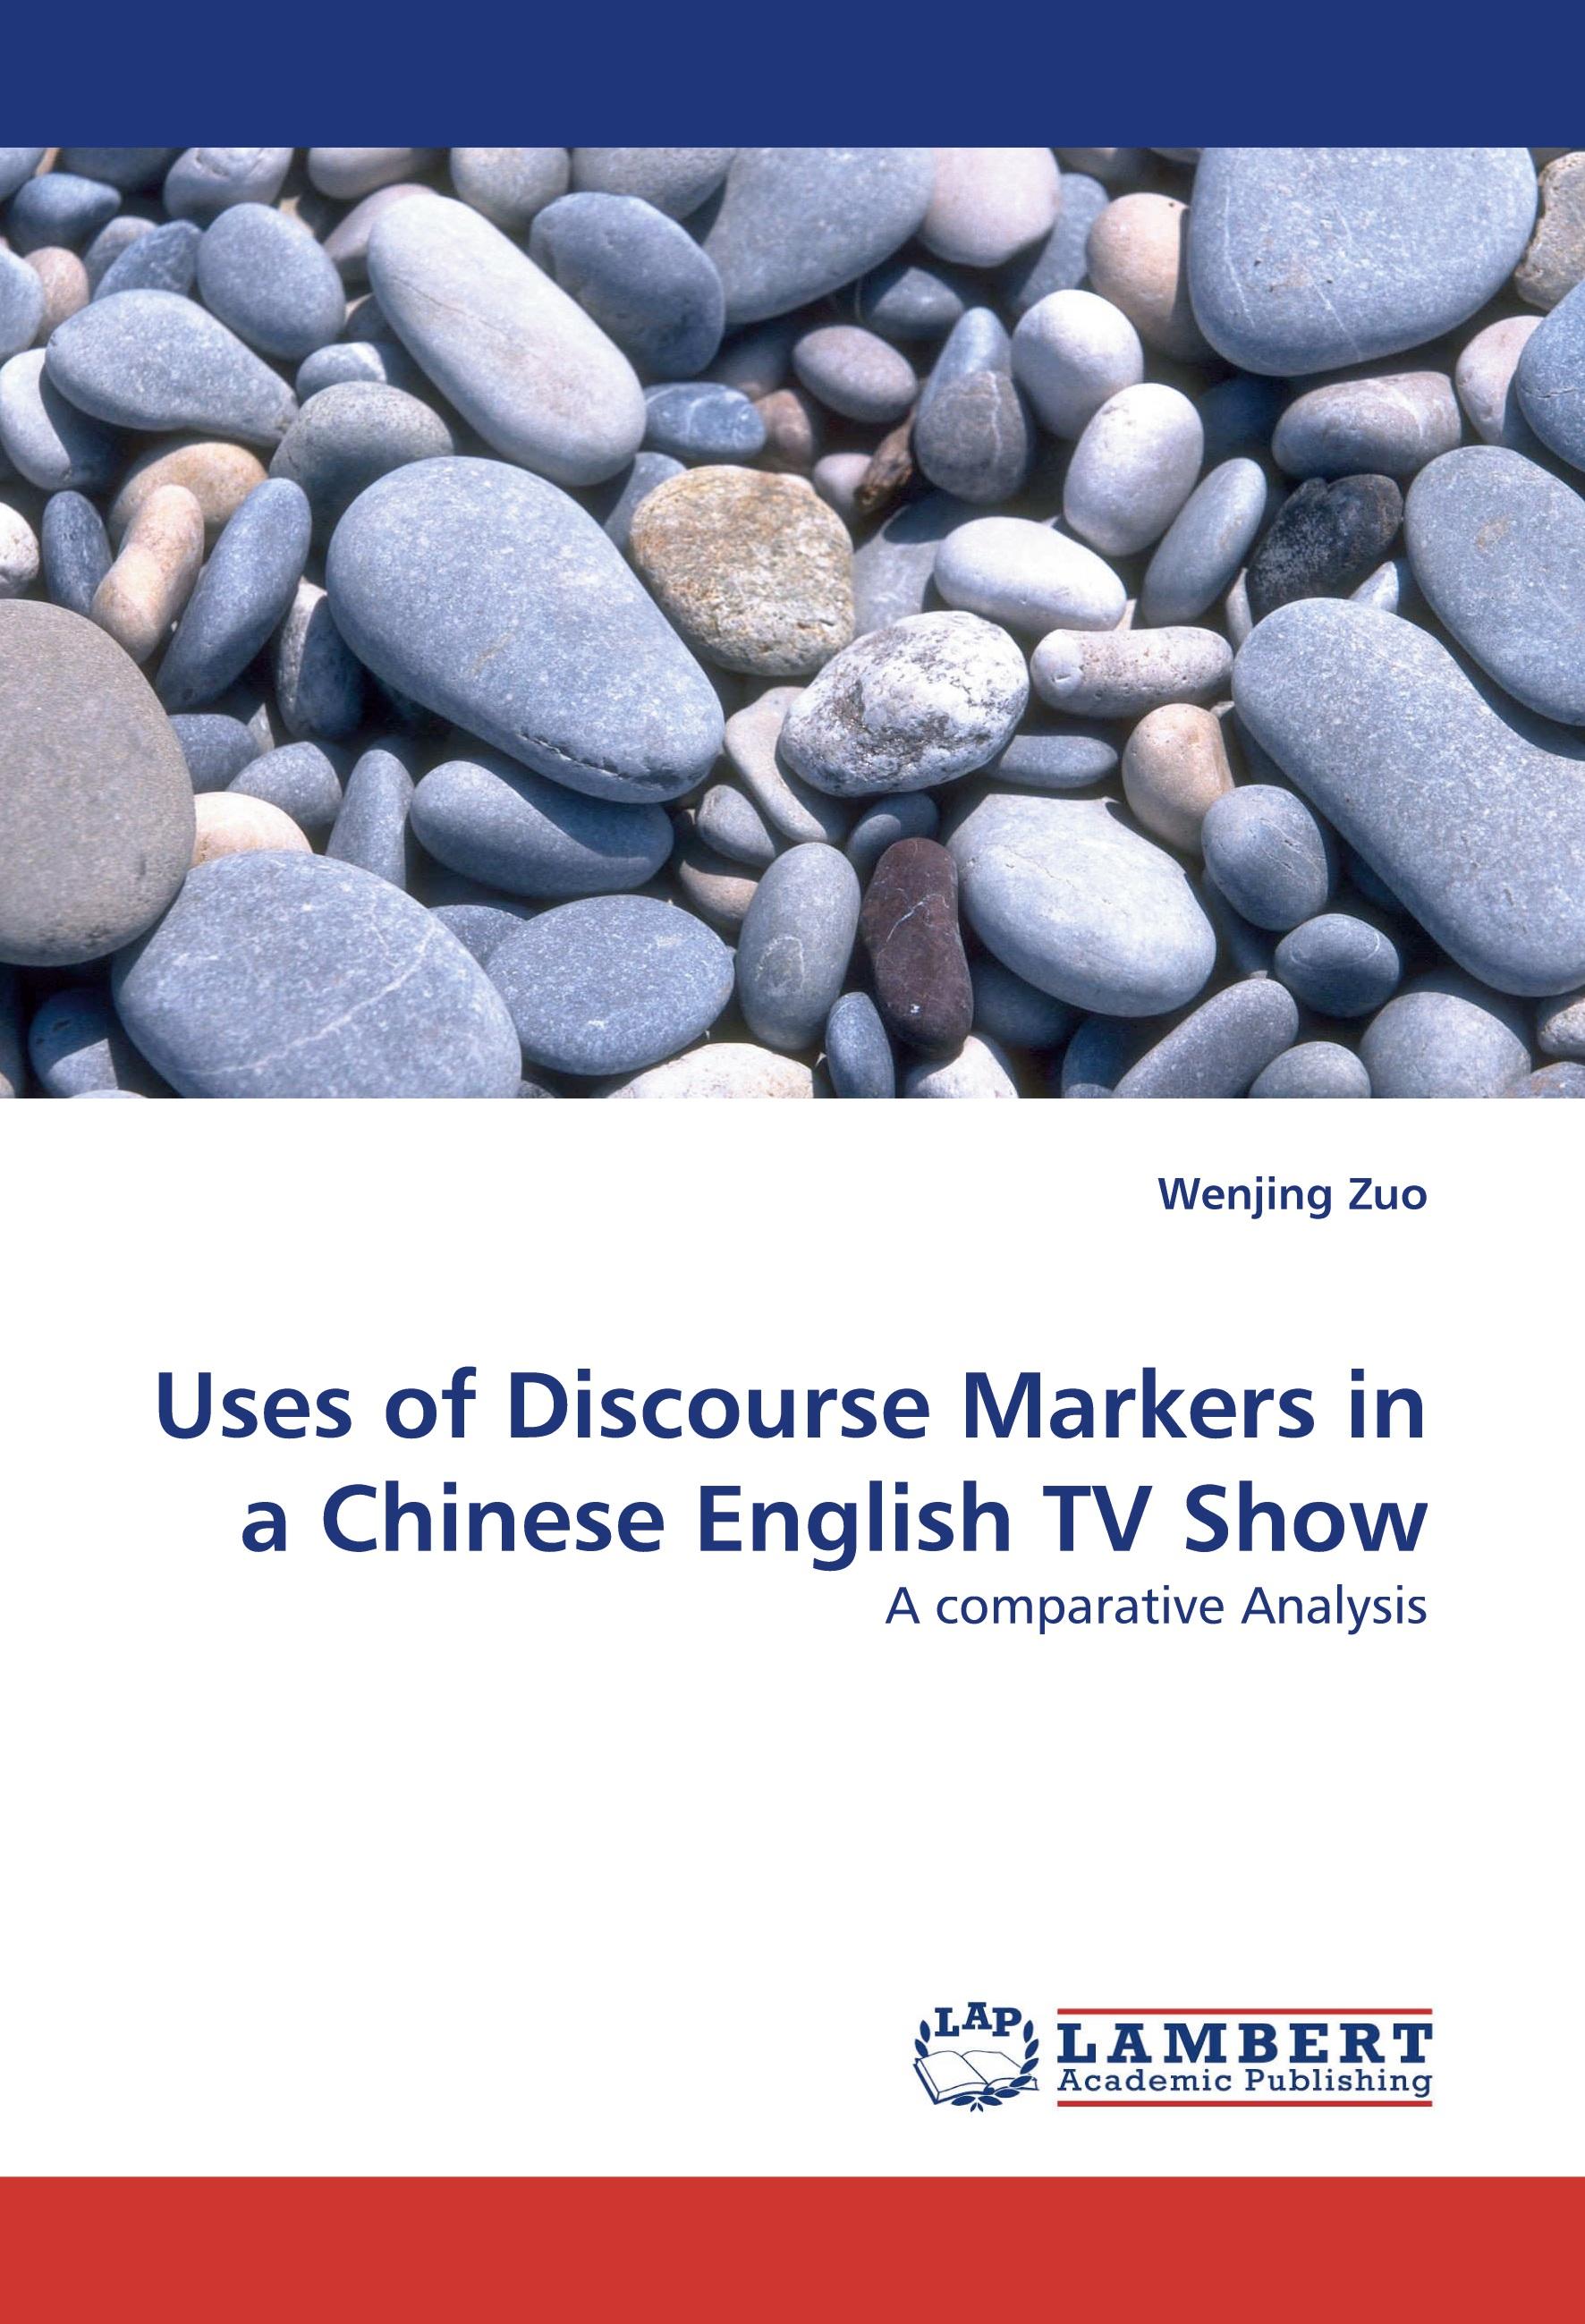 Uses of Discourse Markers in a Chinese English TV Show | A comparative Analysis | Wenjing Zuo | Taschenbuch | Paperback | 252 S. | Englisch | 2010 | LAP LAMBERT Academic Publishing | EAN 9783838371917 - Zuo, Wenjing